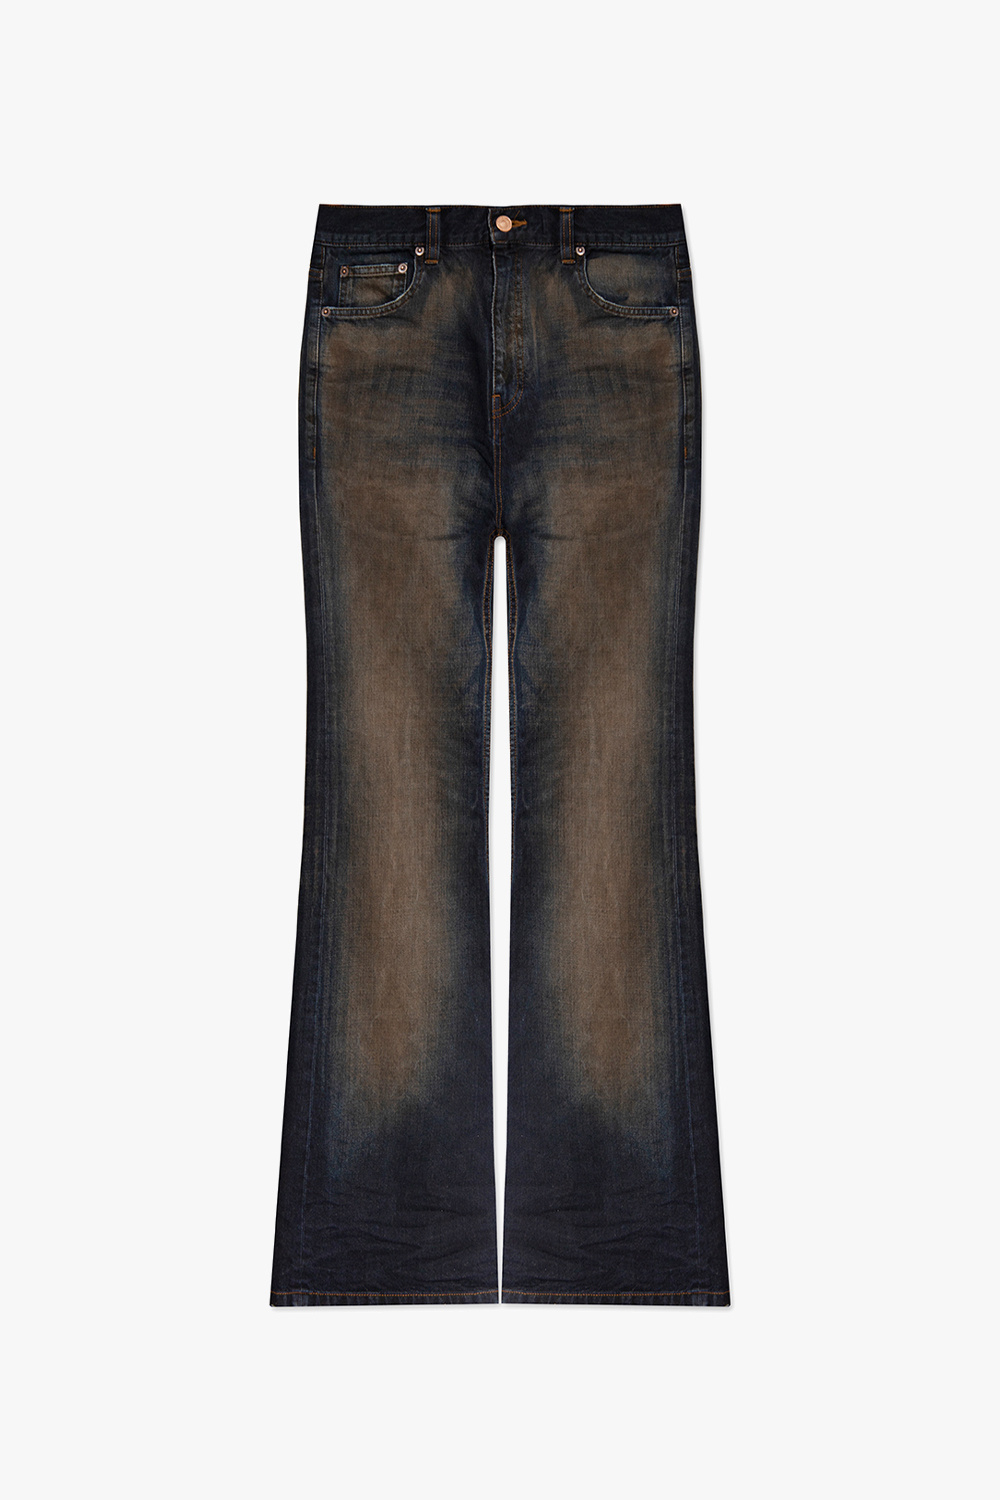 Balenciaga Midwaisted Flared Jeans in Black for Men  Lyst